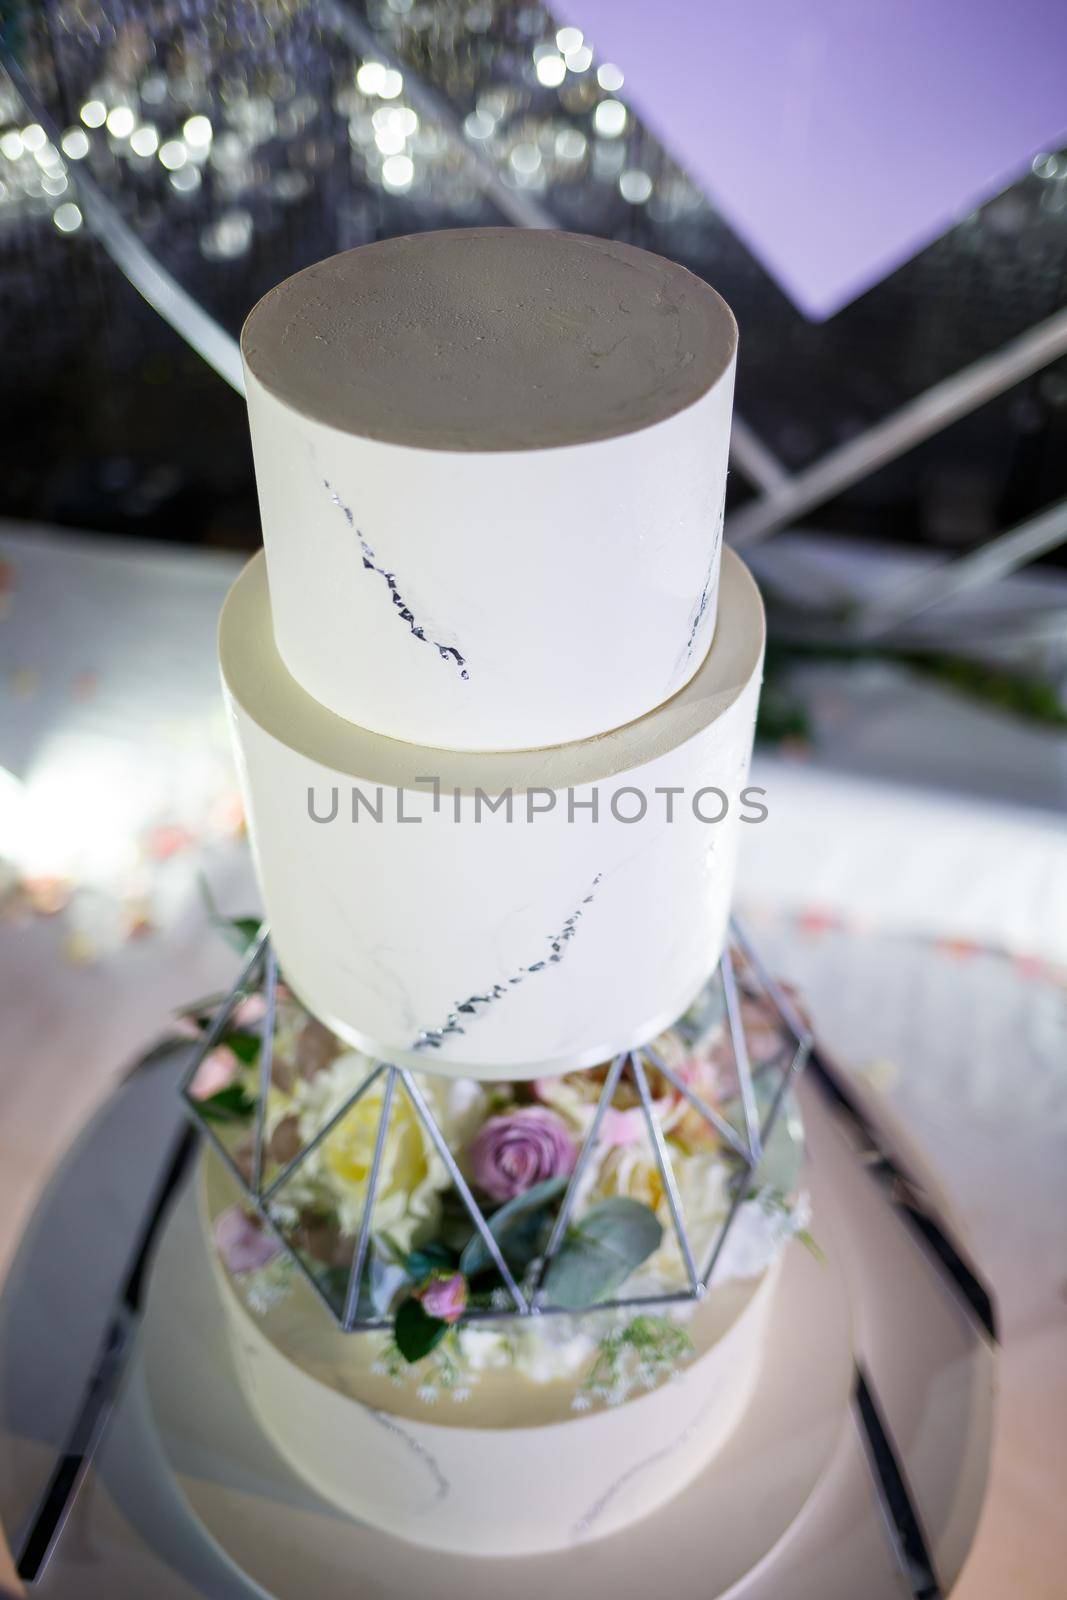 Beautiful tiered delicious dessert sweet cake for newlyweds. by Dmitrytph